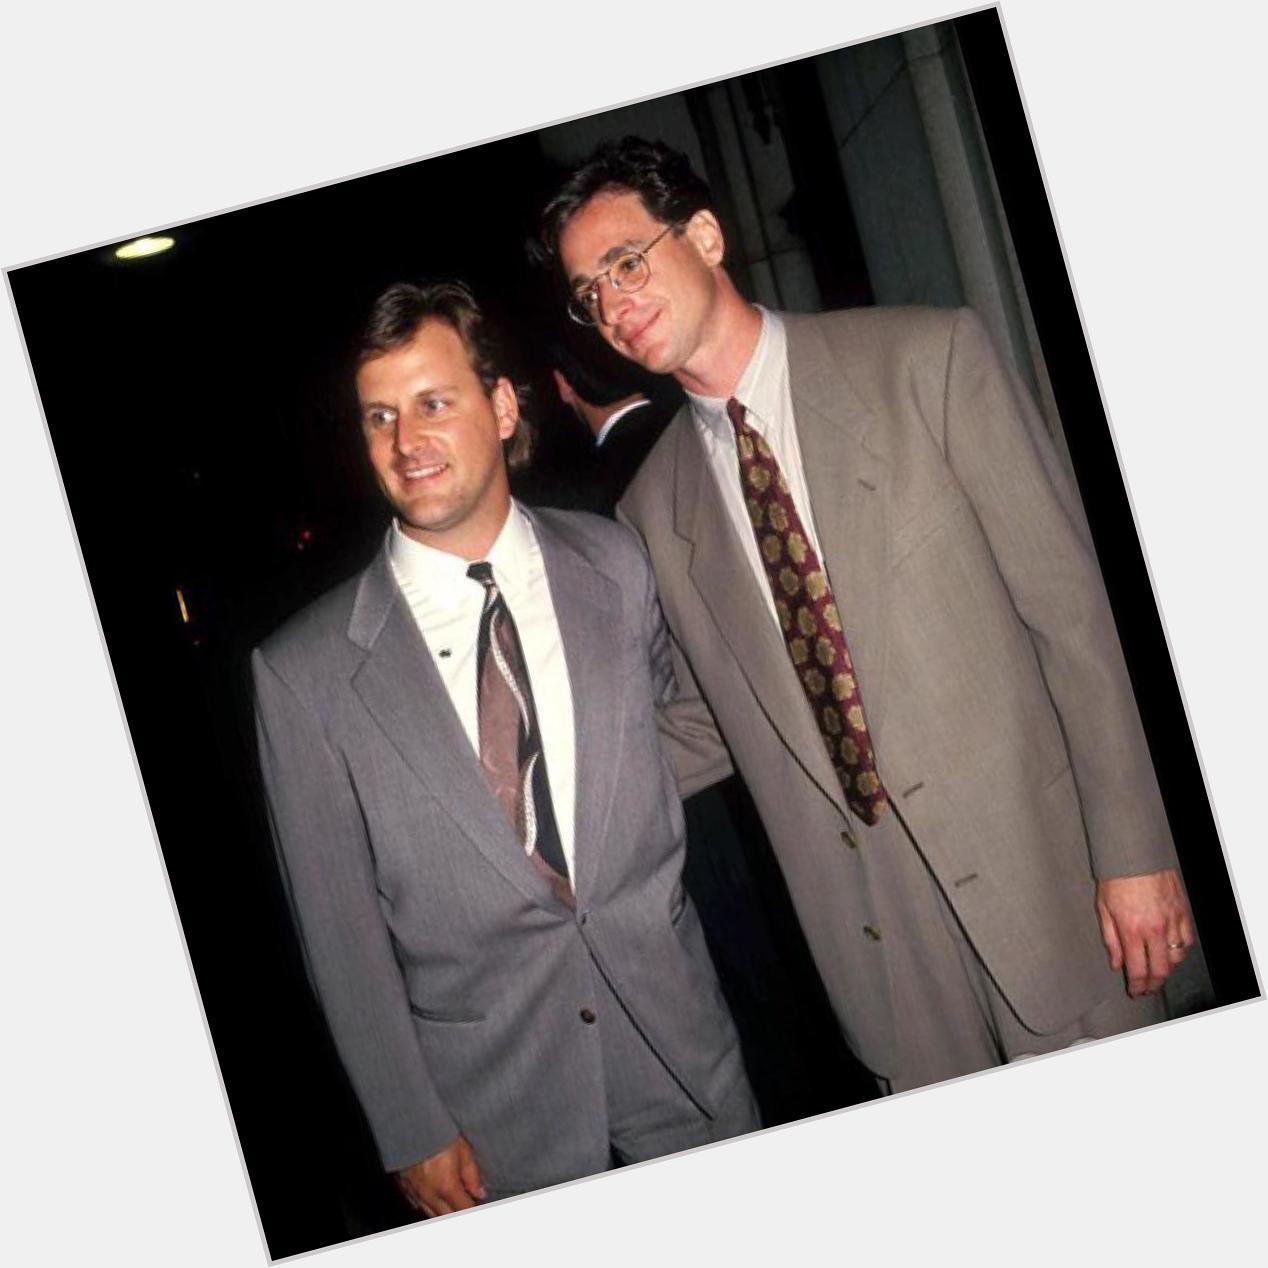 Bob Saget: Happy Birthday to my brother Dave Coulier. Seems like only yesterday we were 